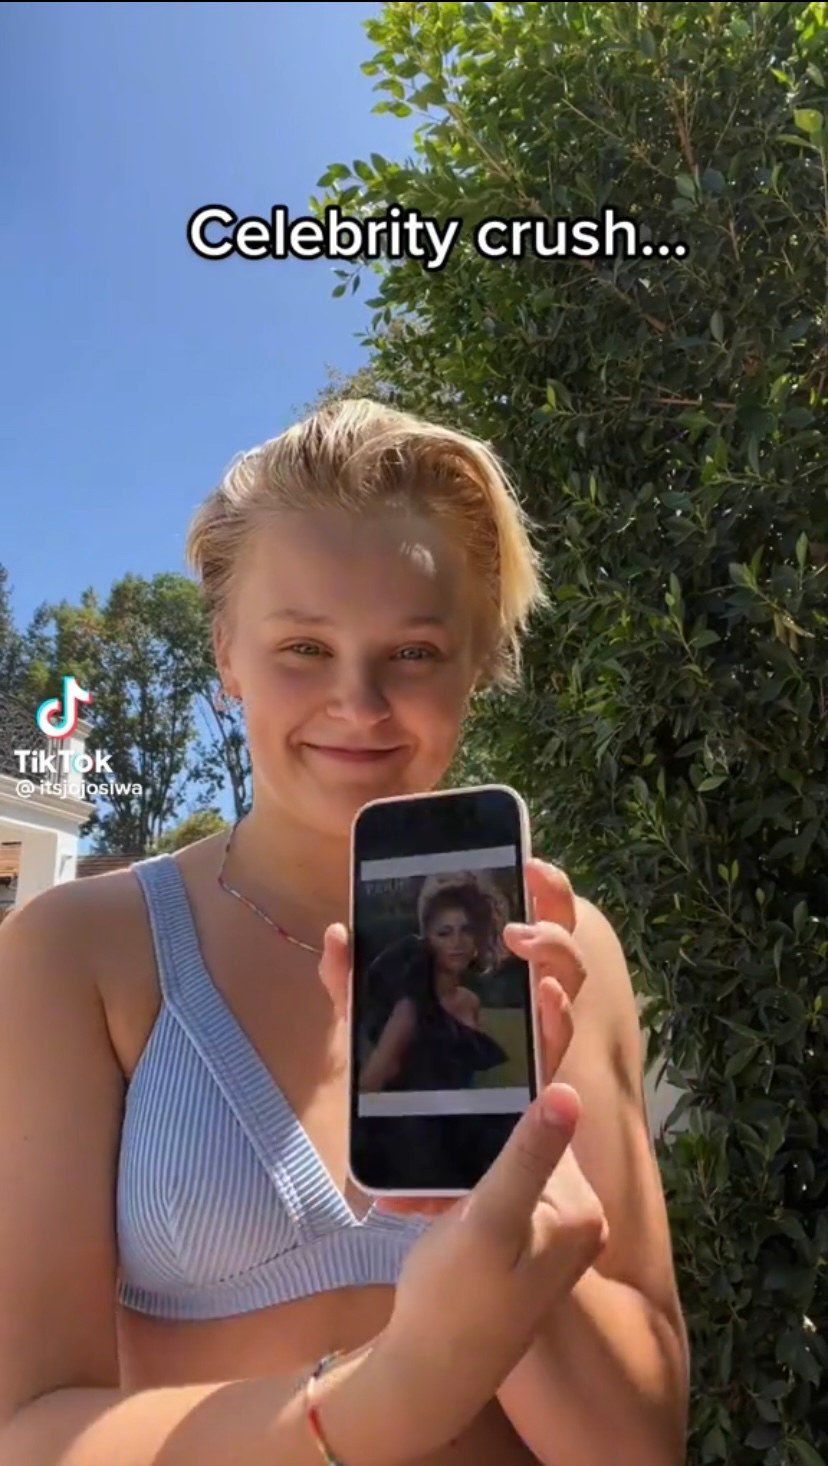 JoJo holds up her phone with a photo of Zendaya